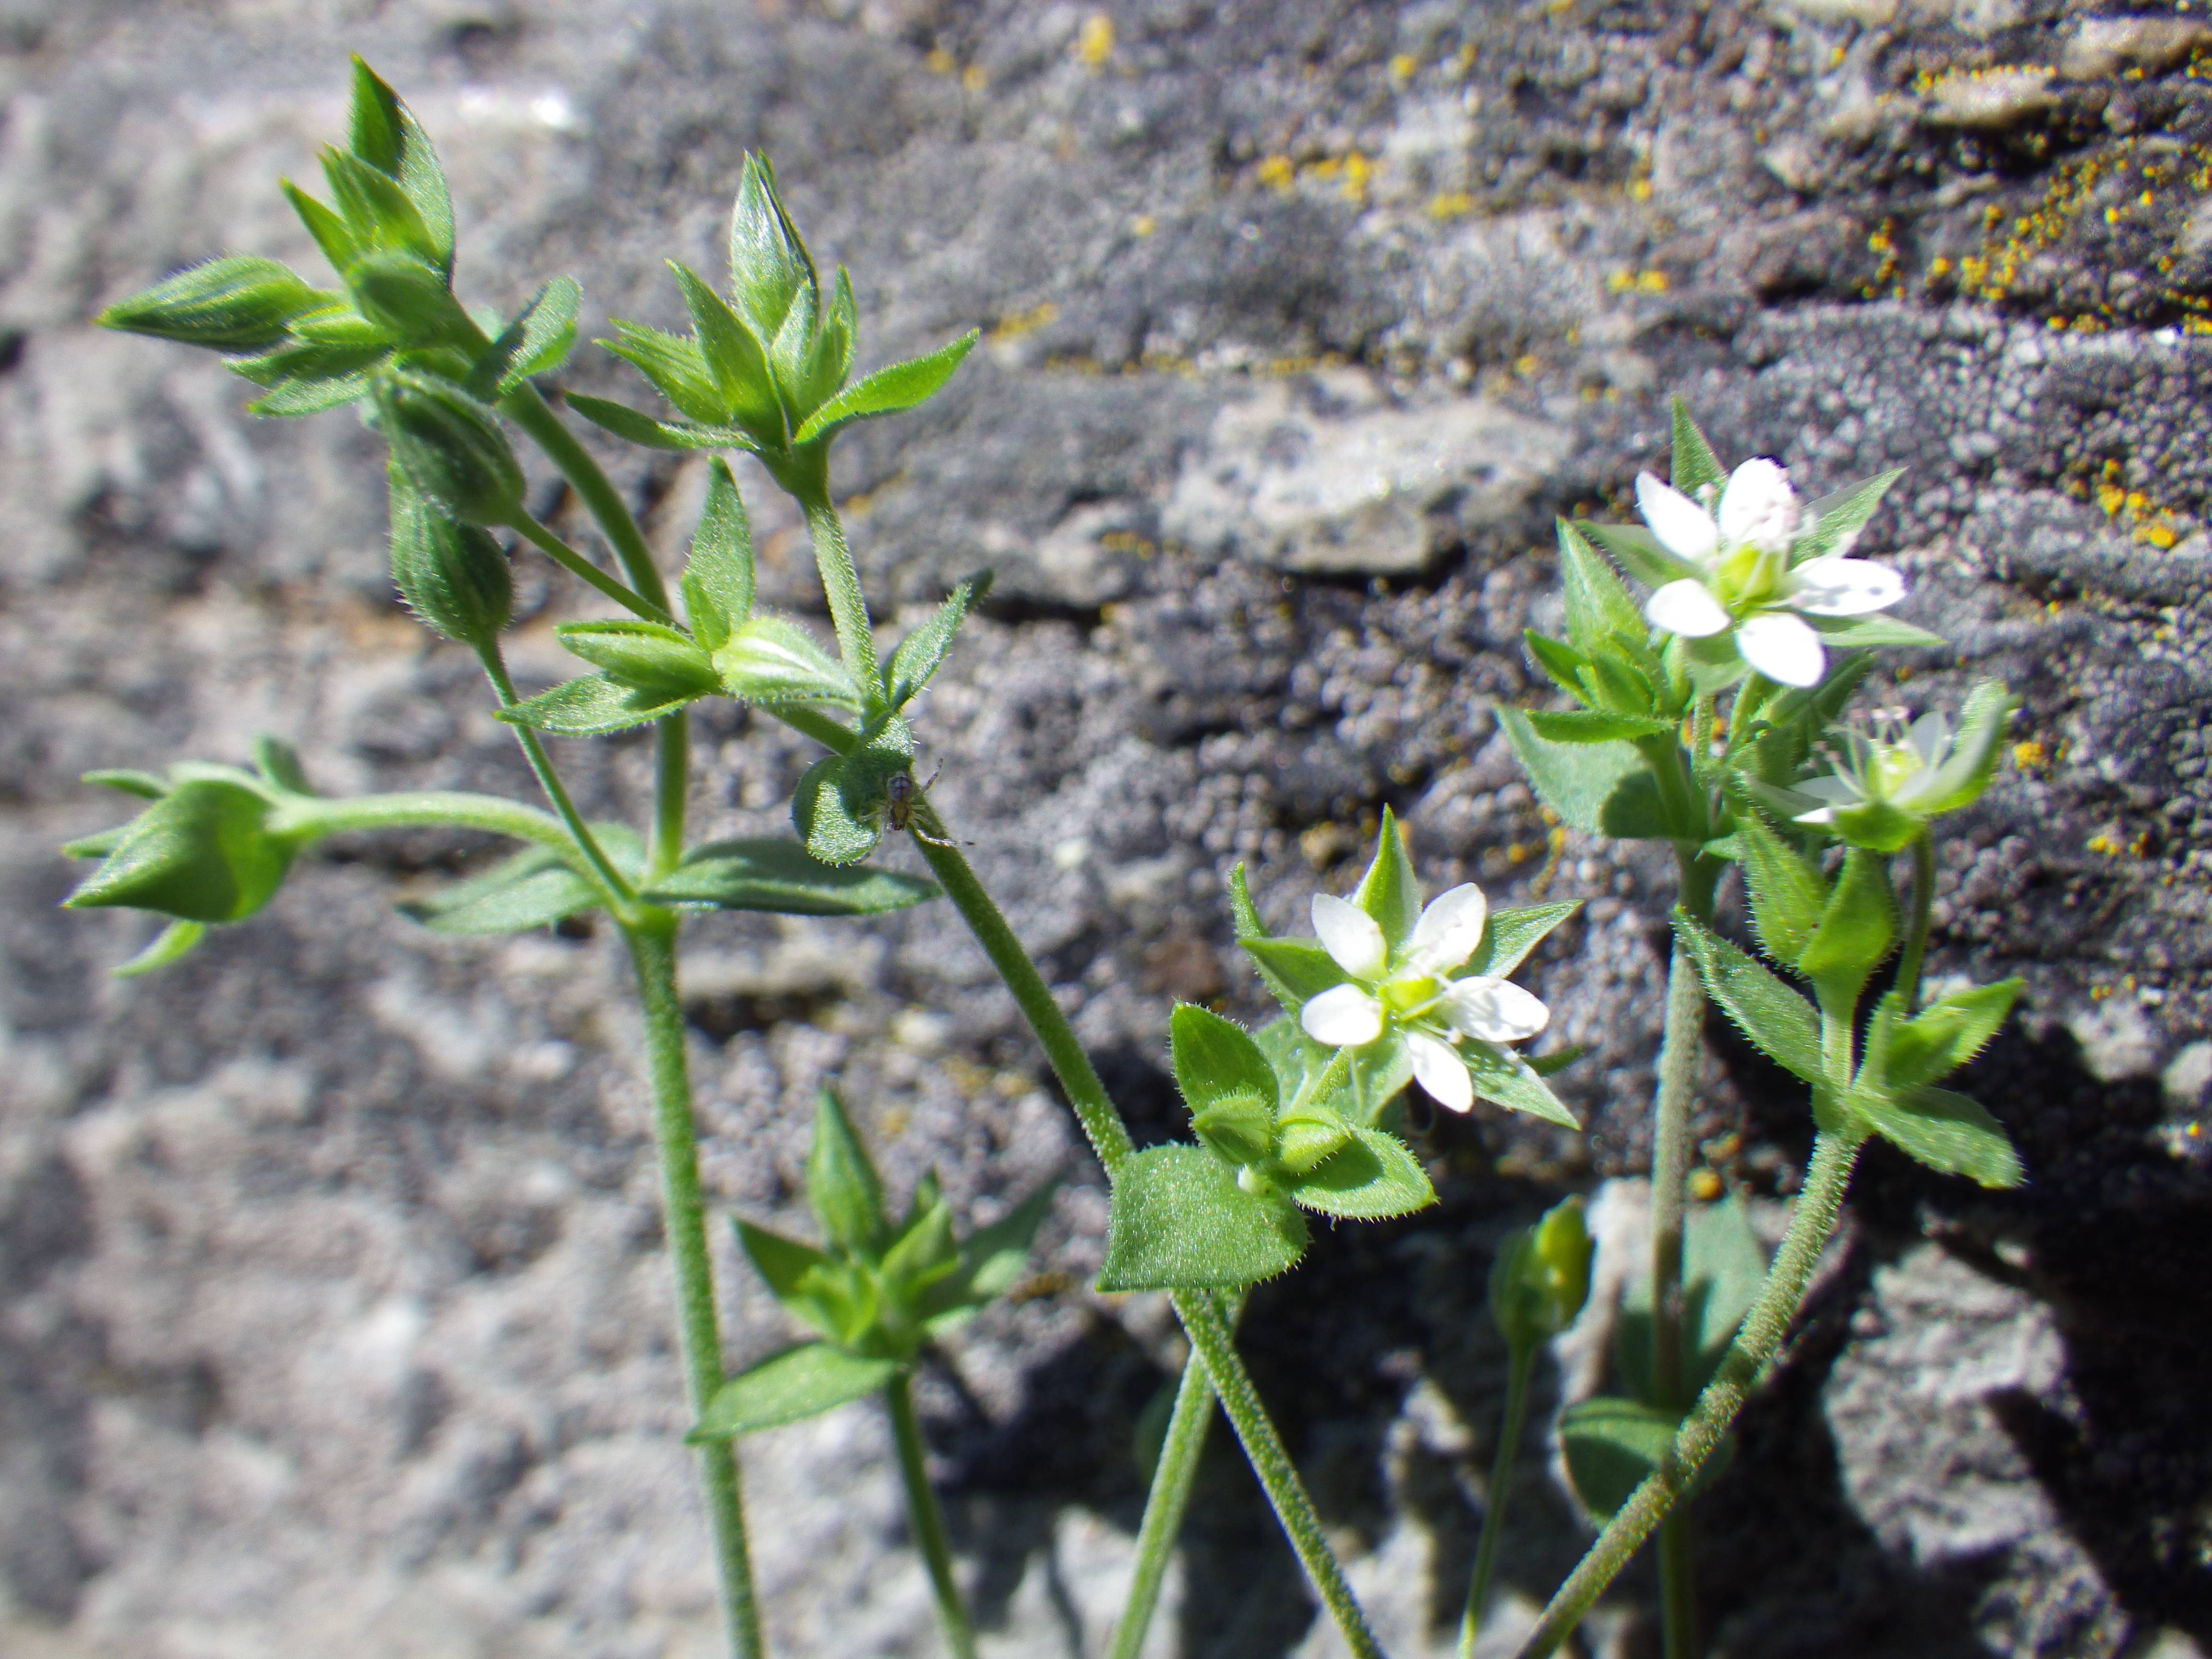 white flowers with lime center, green buds, leaves and green stems